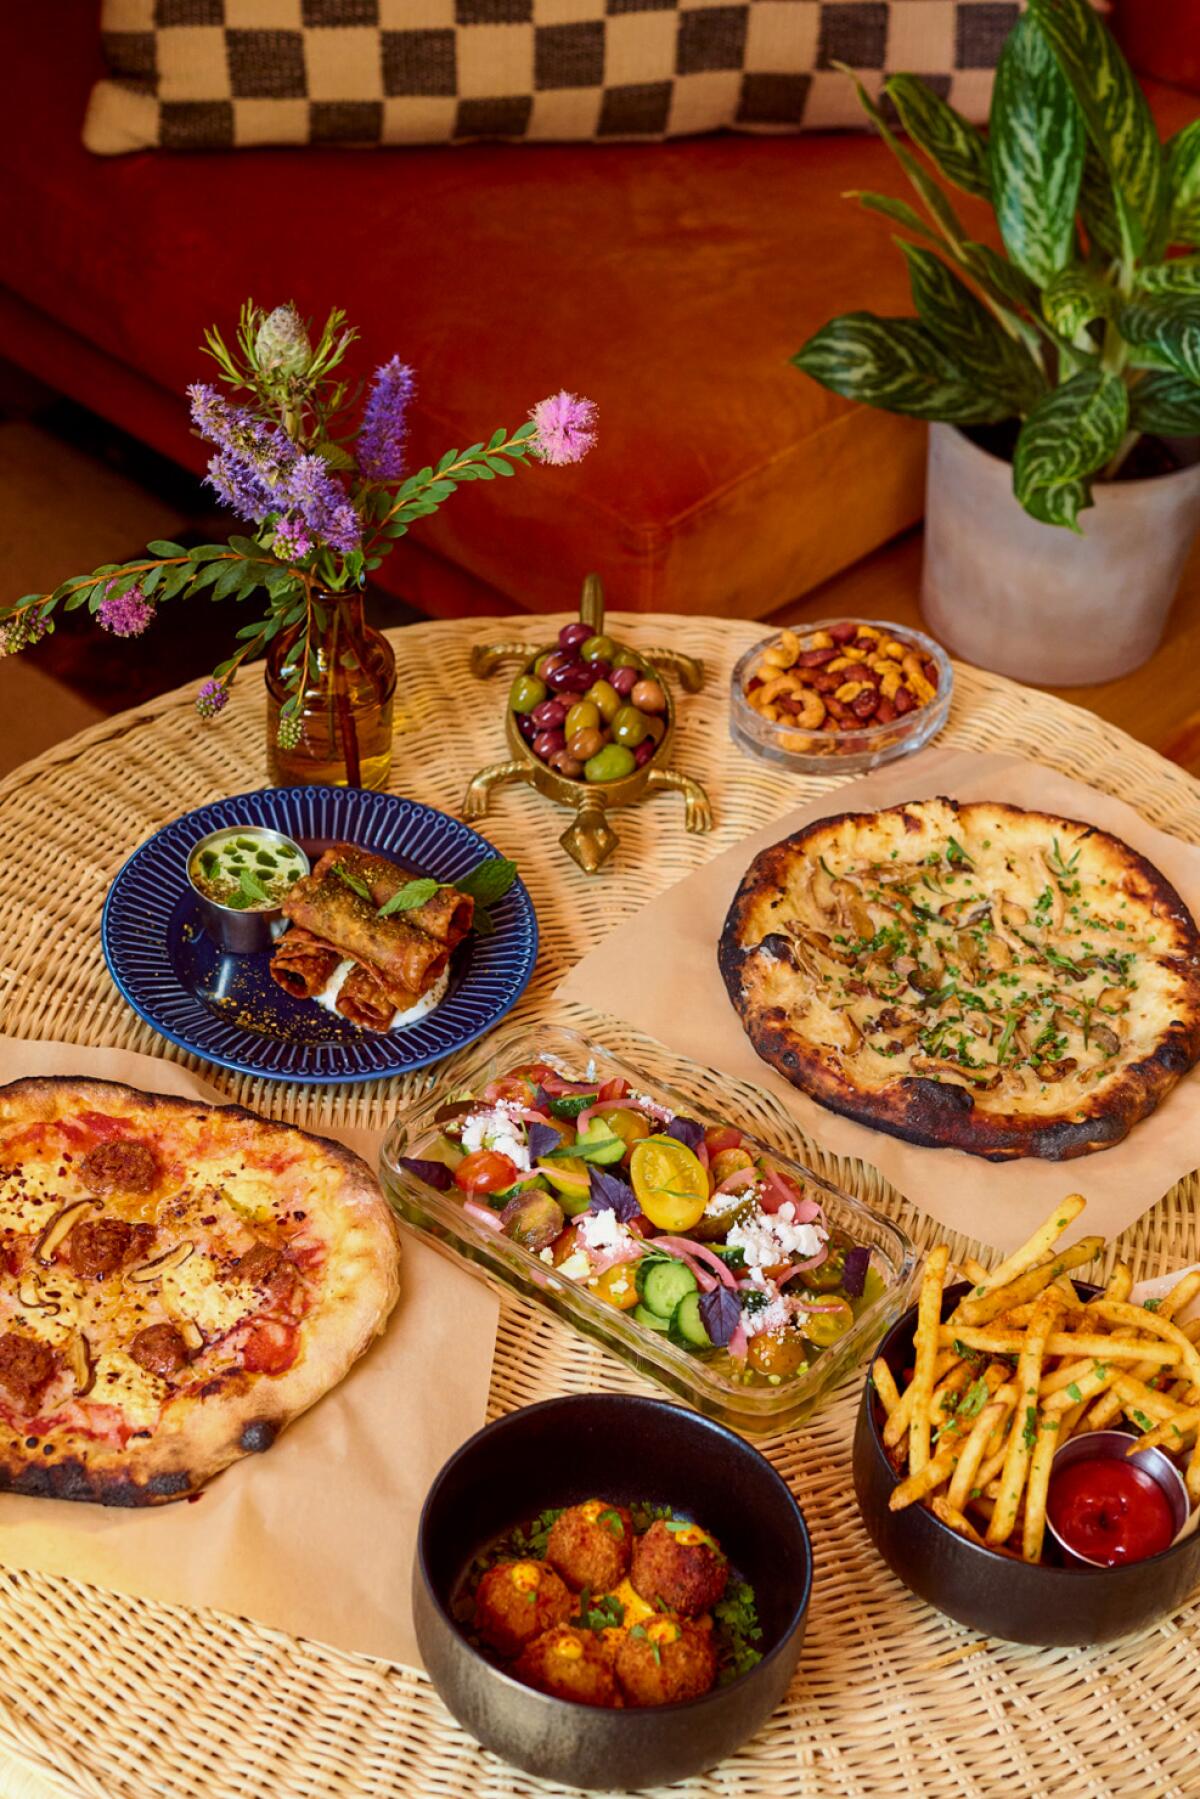 A spread of food from Justine's Wine Bar in Frogtown, including two pizzas, a side of fries, potato croquettes, and more.